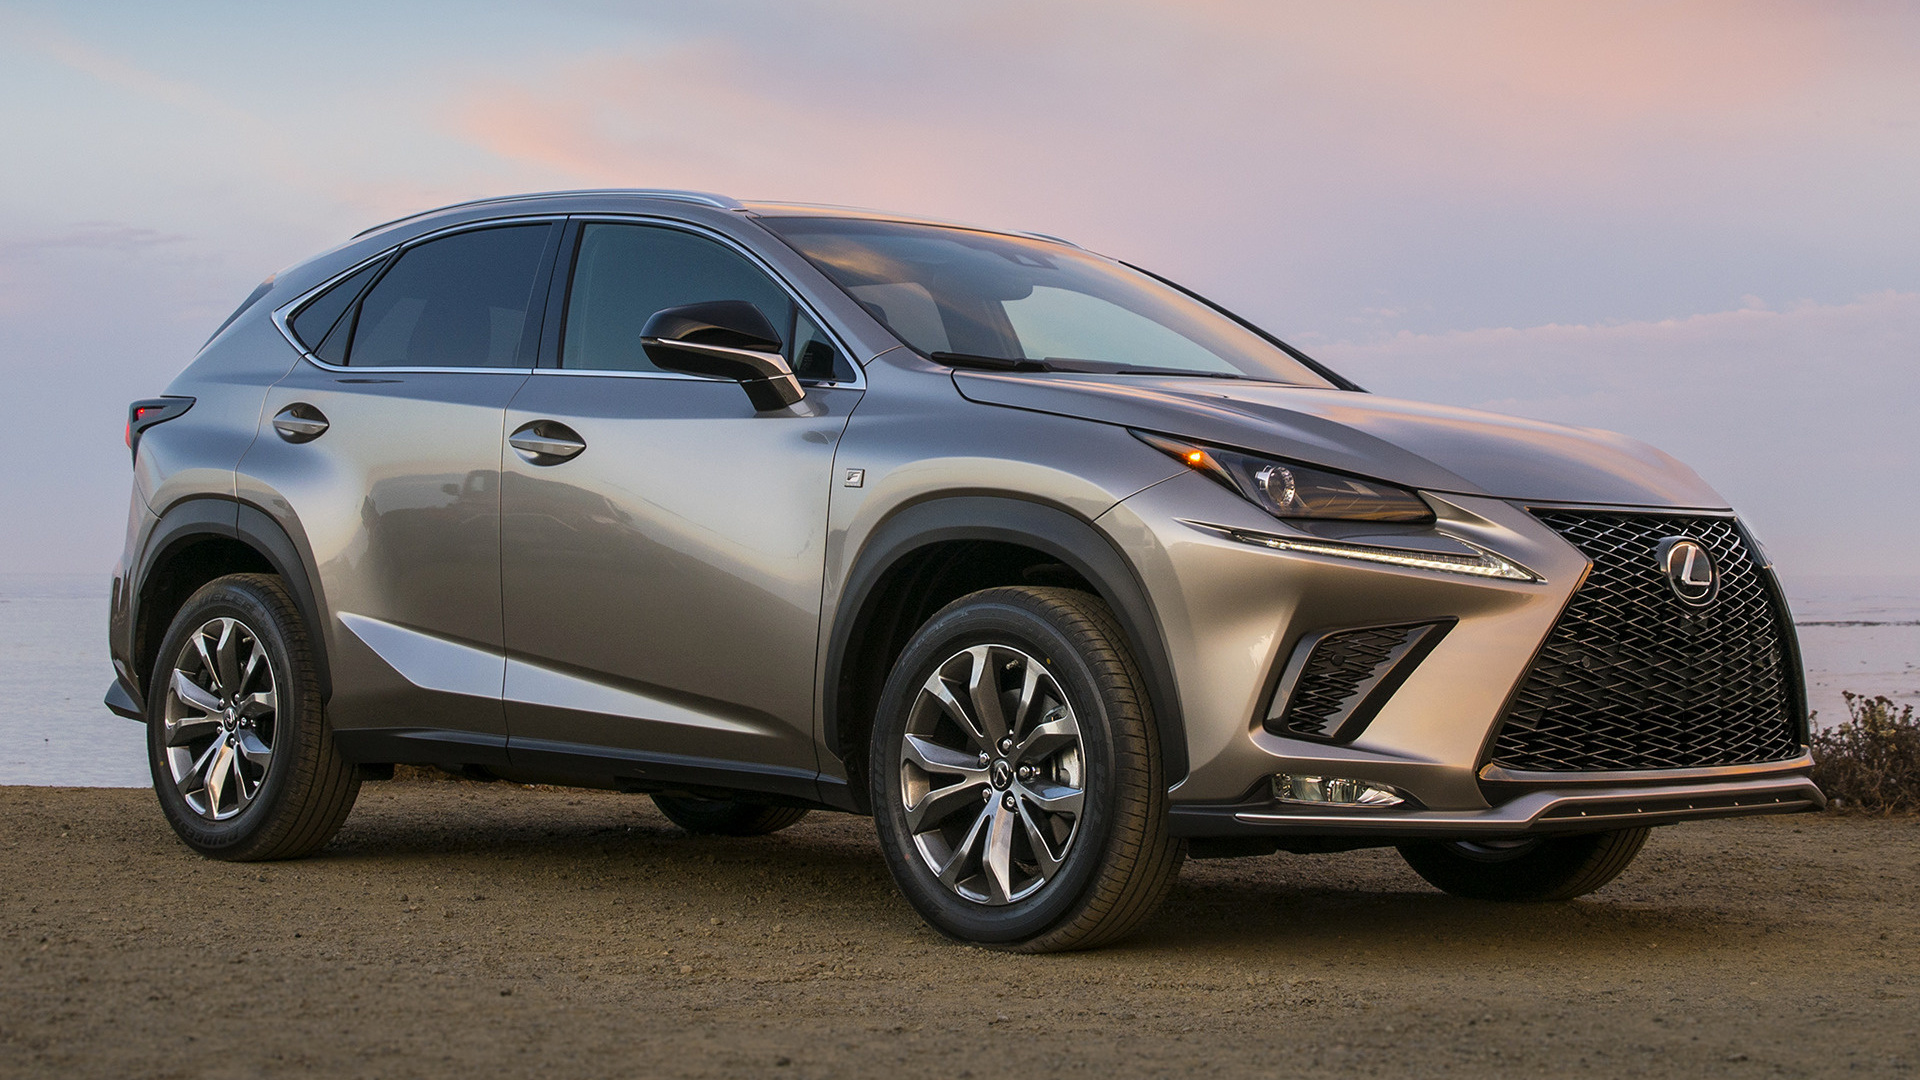 2018 Lexus NX F Sport (US) - Wallpapers and HD Images ...